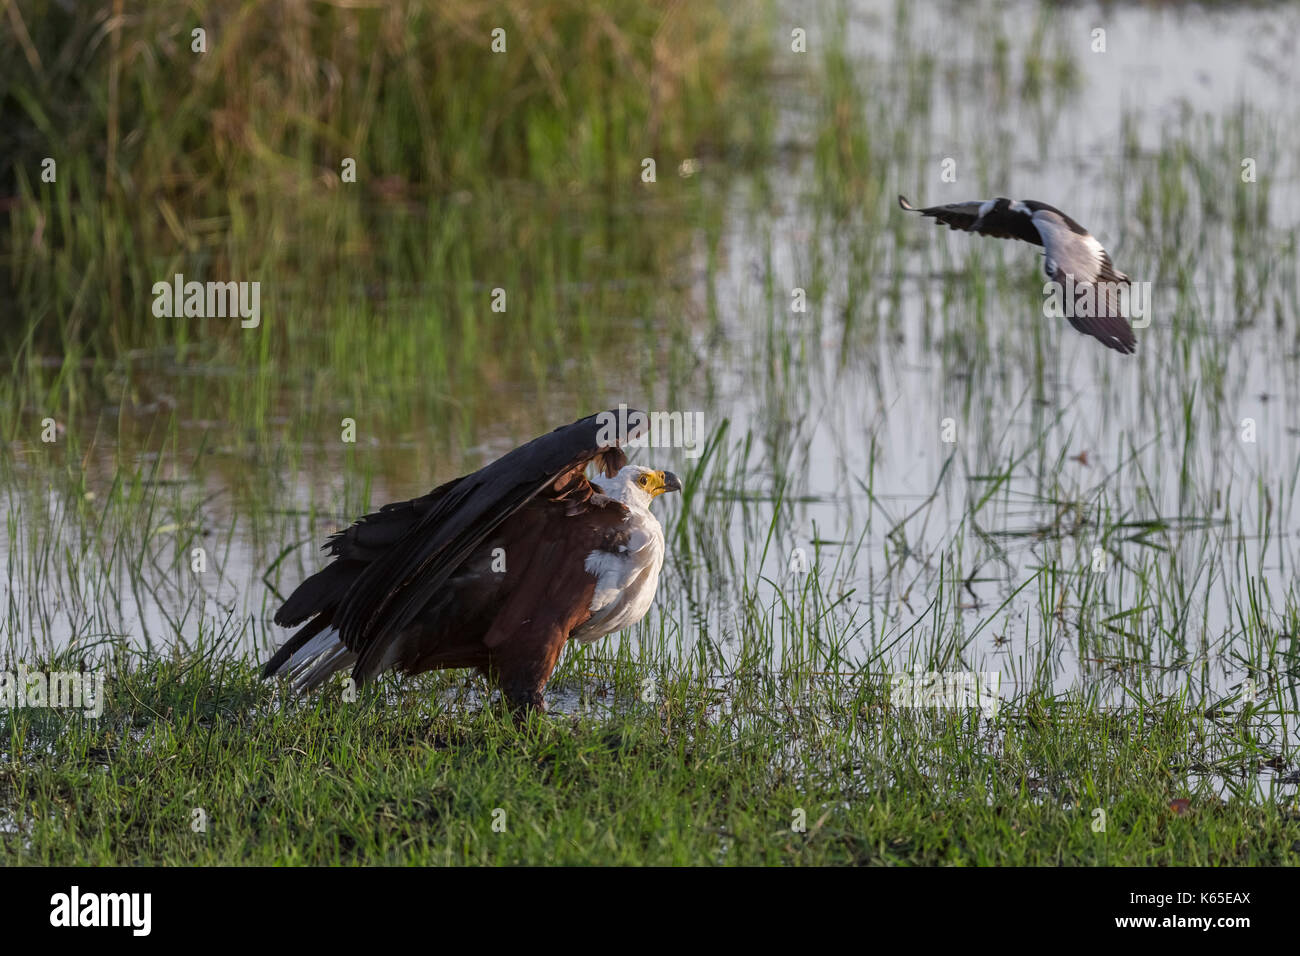 African Fish eagle, (Haliaeetus vocifer) being attacked by Plover, (Charadriinae) in Kwai, Botswana Stock Photo